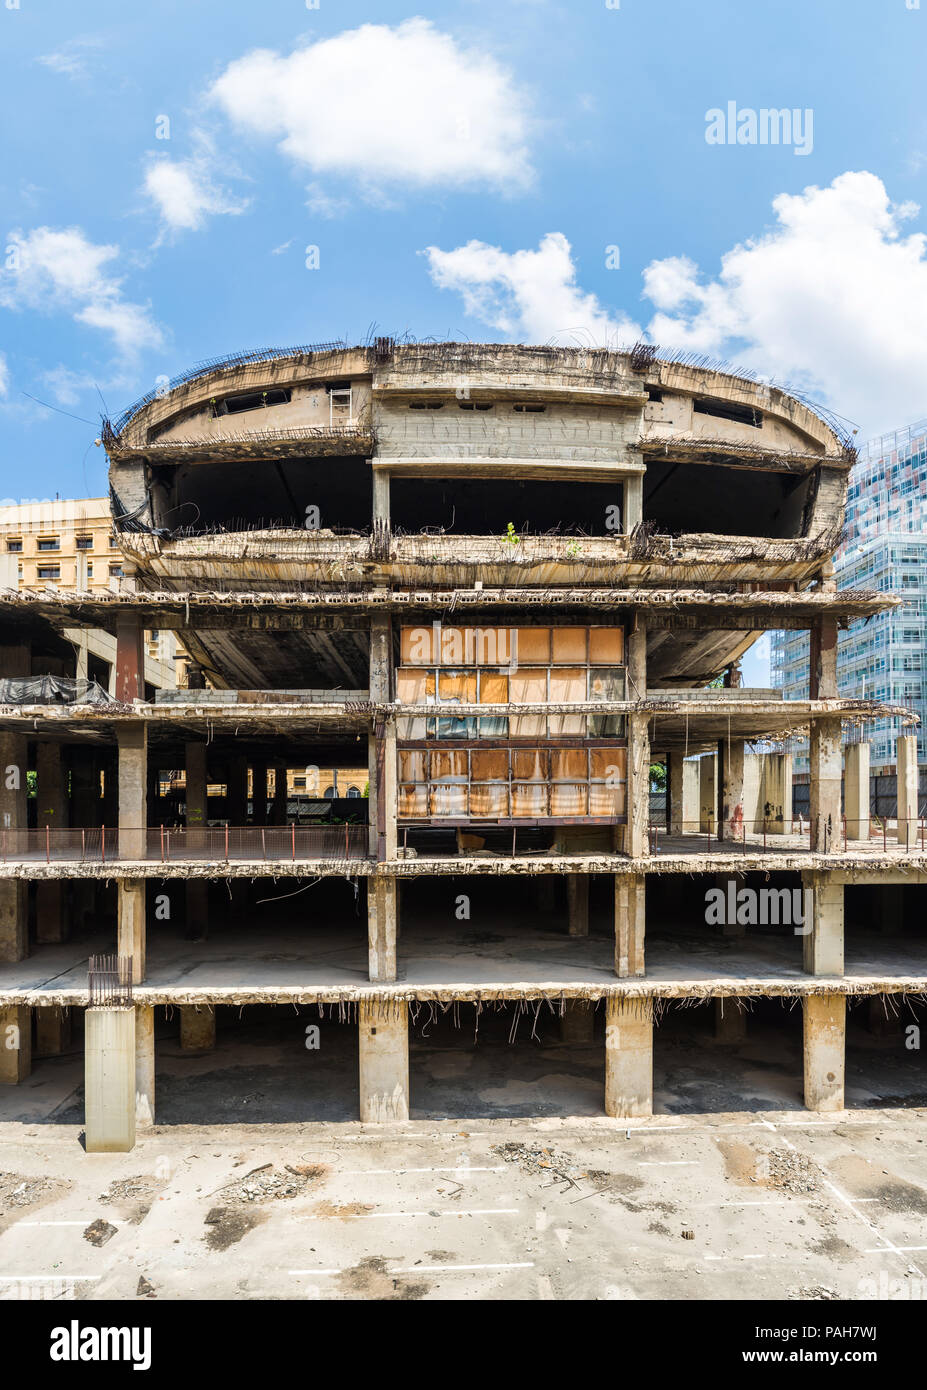 The egg-shaped Dome City Center theater or the 'Egg', abandoned cinema left in ruins after the civil war in Lebanon, Beirut Central District Stock Photo